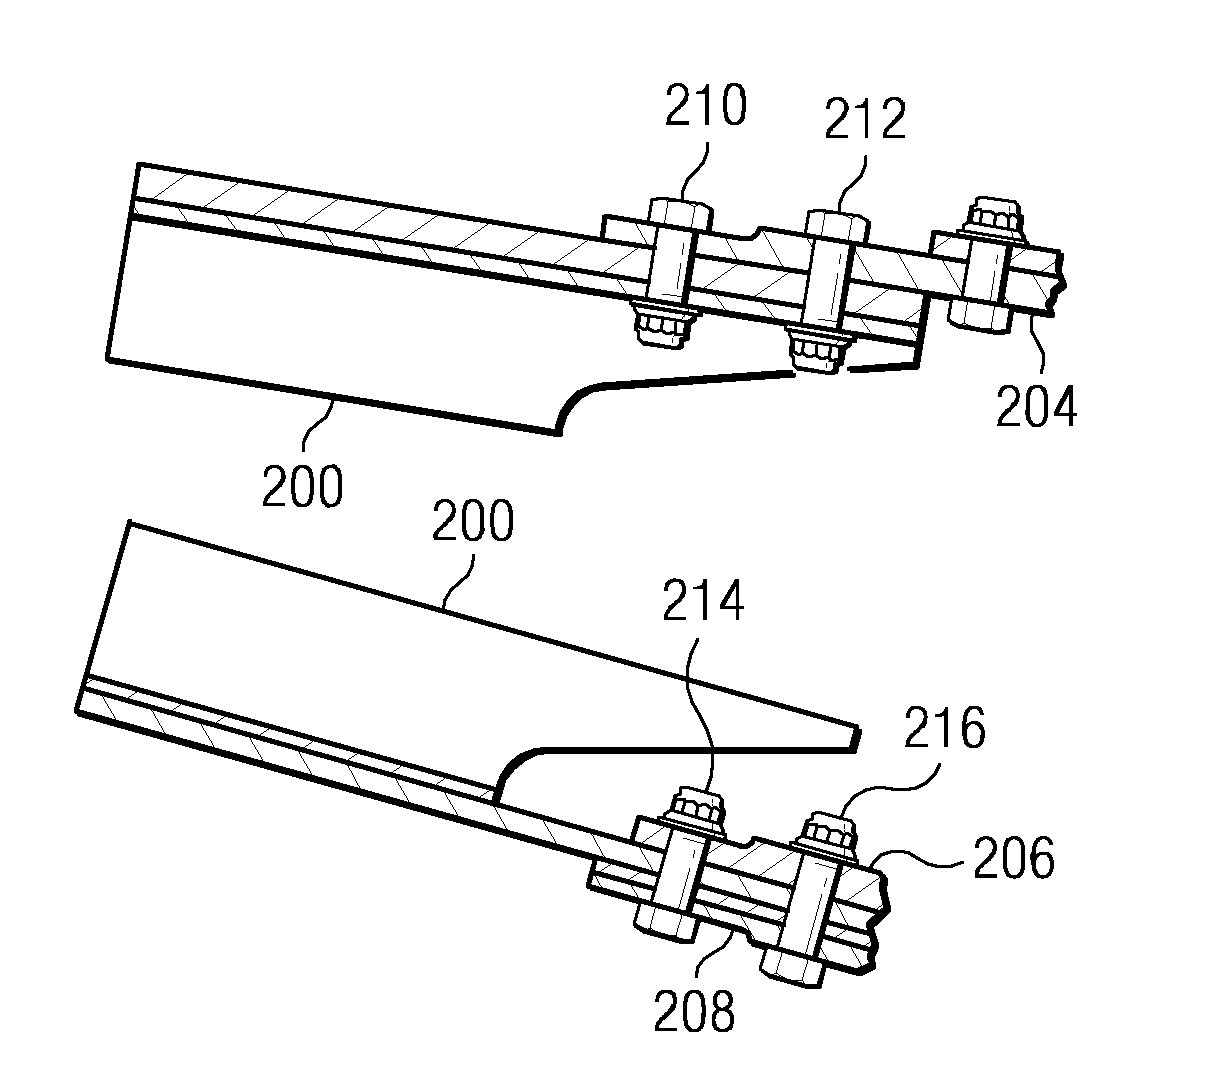 Method and apparatus for preventing lightning strike damage to a structural component